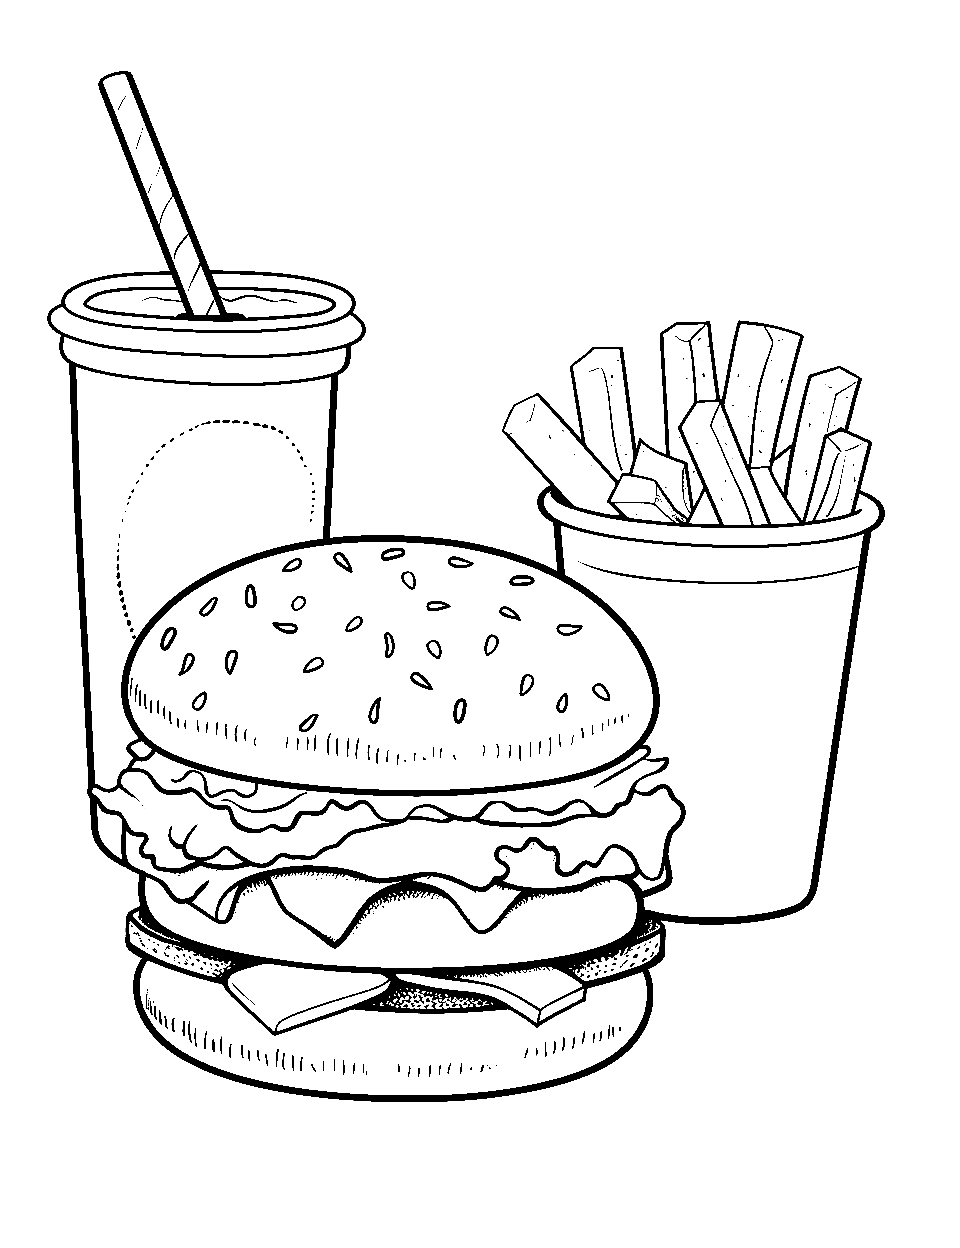 Fast Food Fiesta Coloring Page - A burger, fries, and a soda all placed side by side.